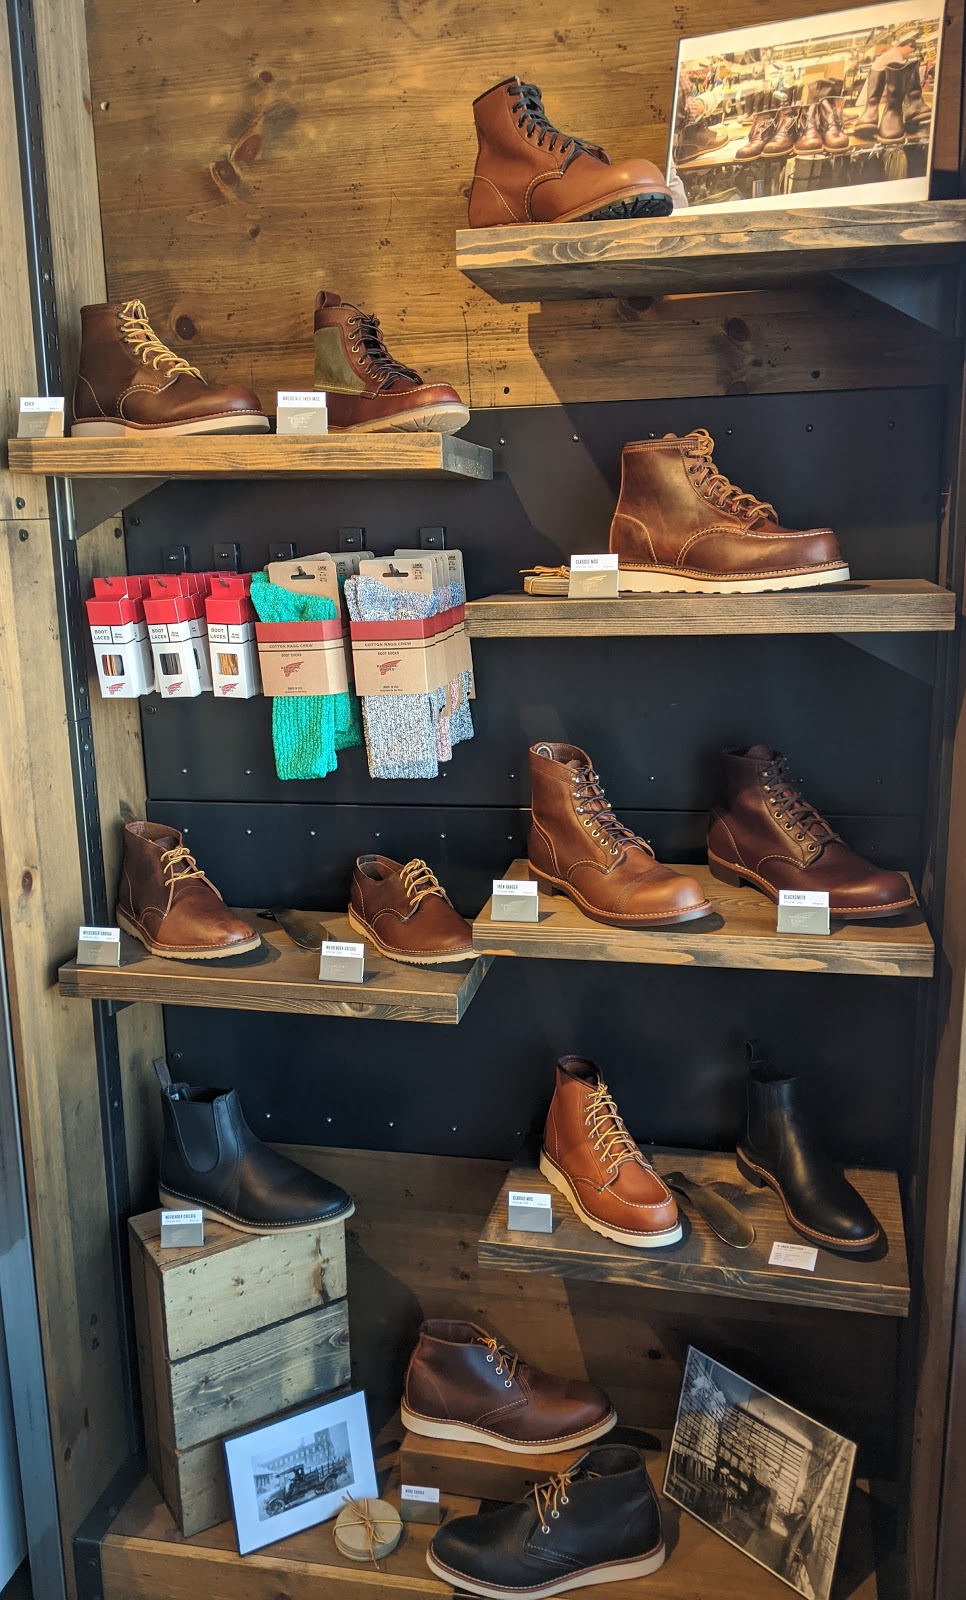 RED WING - EDMOND, OK | 1380 W Covell Rd SUITE 140, SUITE 140, Edmond, OK 73003, USA | Phone: (405) 697-2898